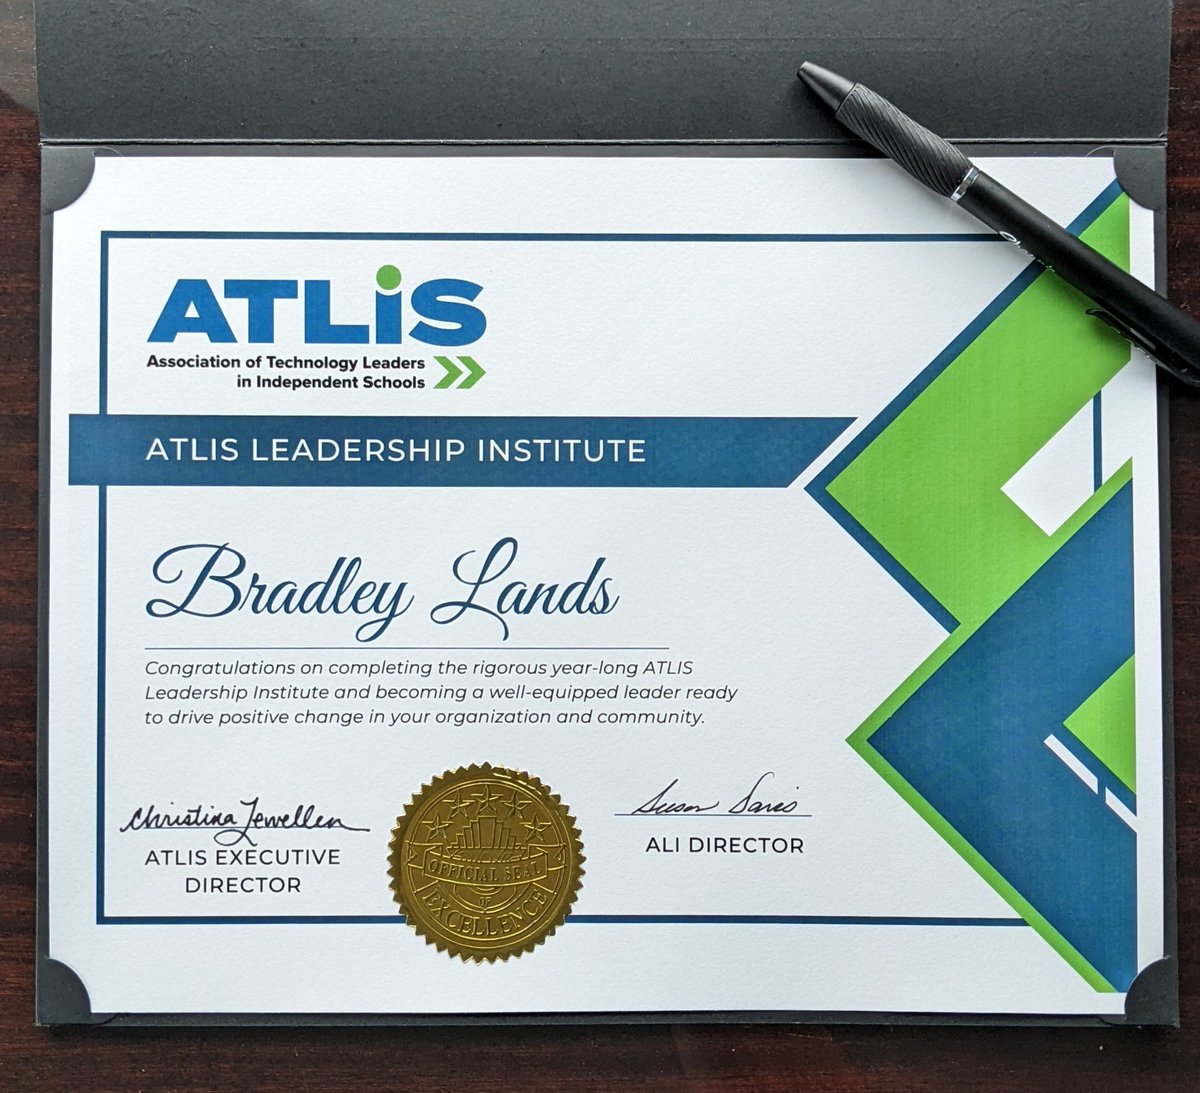 Congrats to my fellow ATLIS Leadership Institute cohort members on graduating from the ALI today at the #ATLIS23 Annual Conference!

It was such a pleasure learning and working with you all!